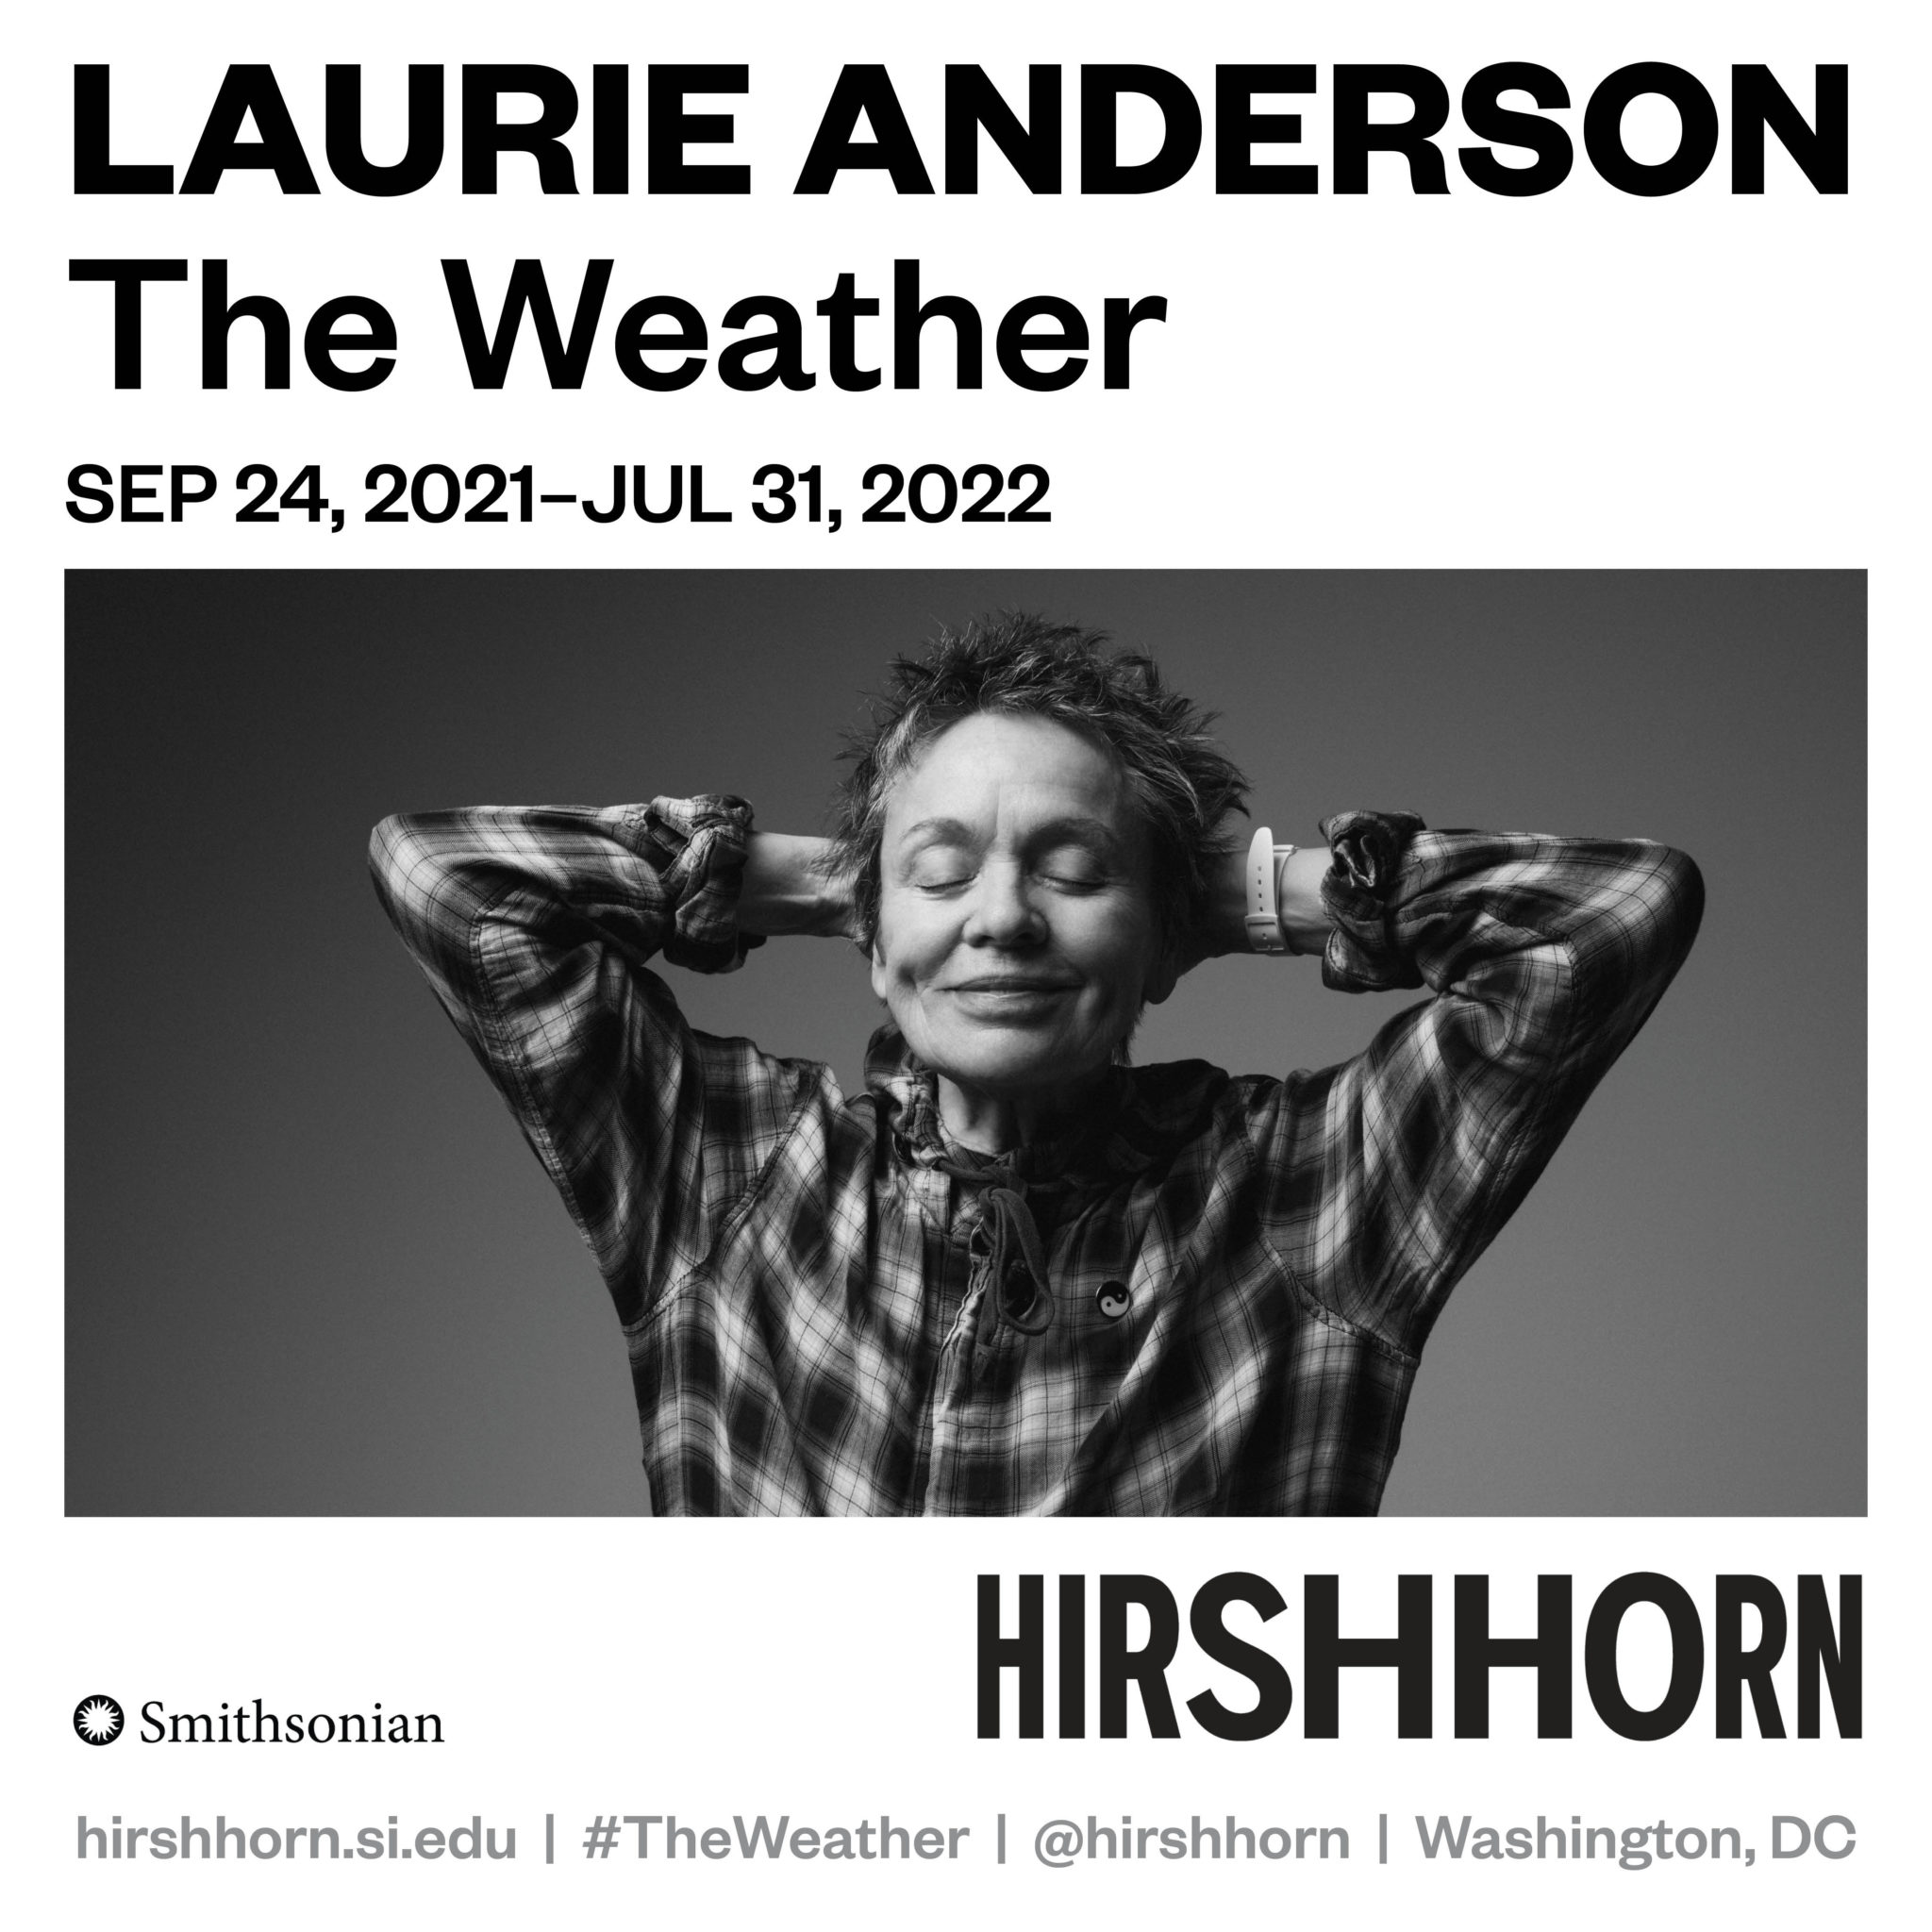 The Weather Laurie Anderson